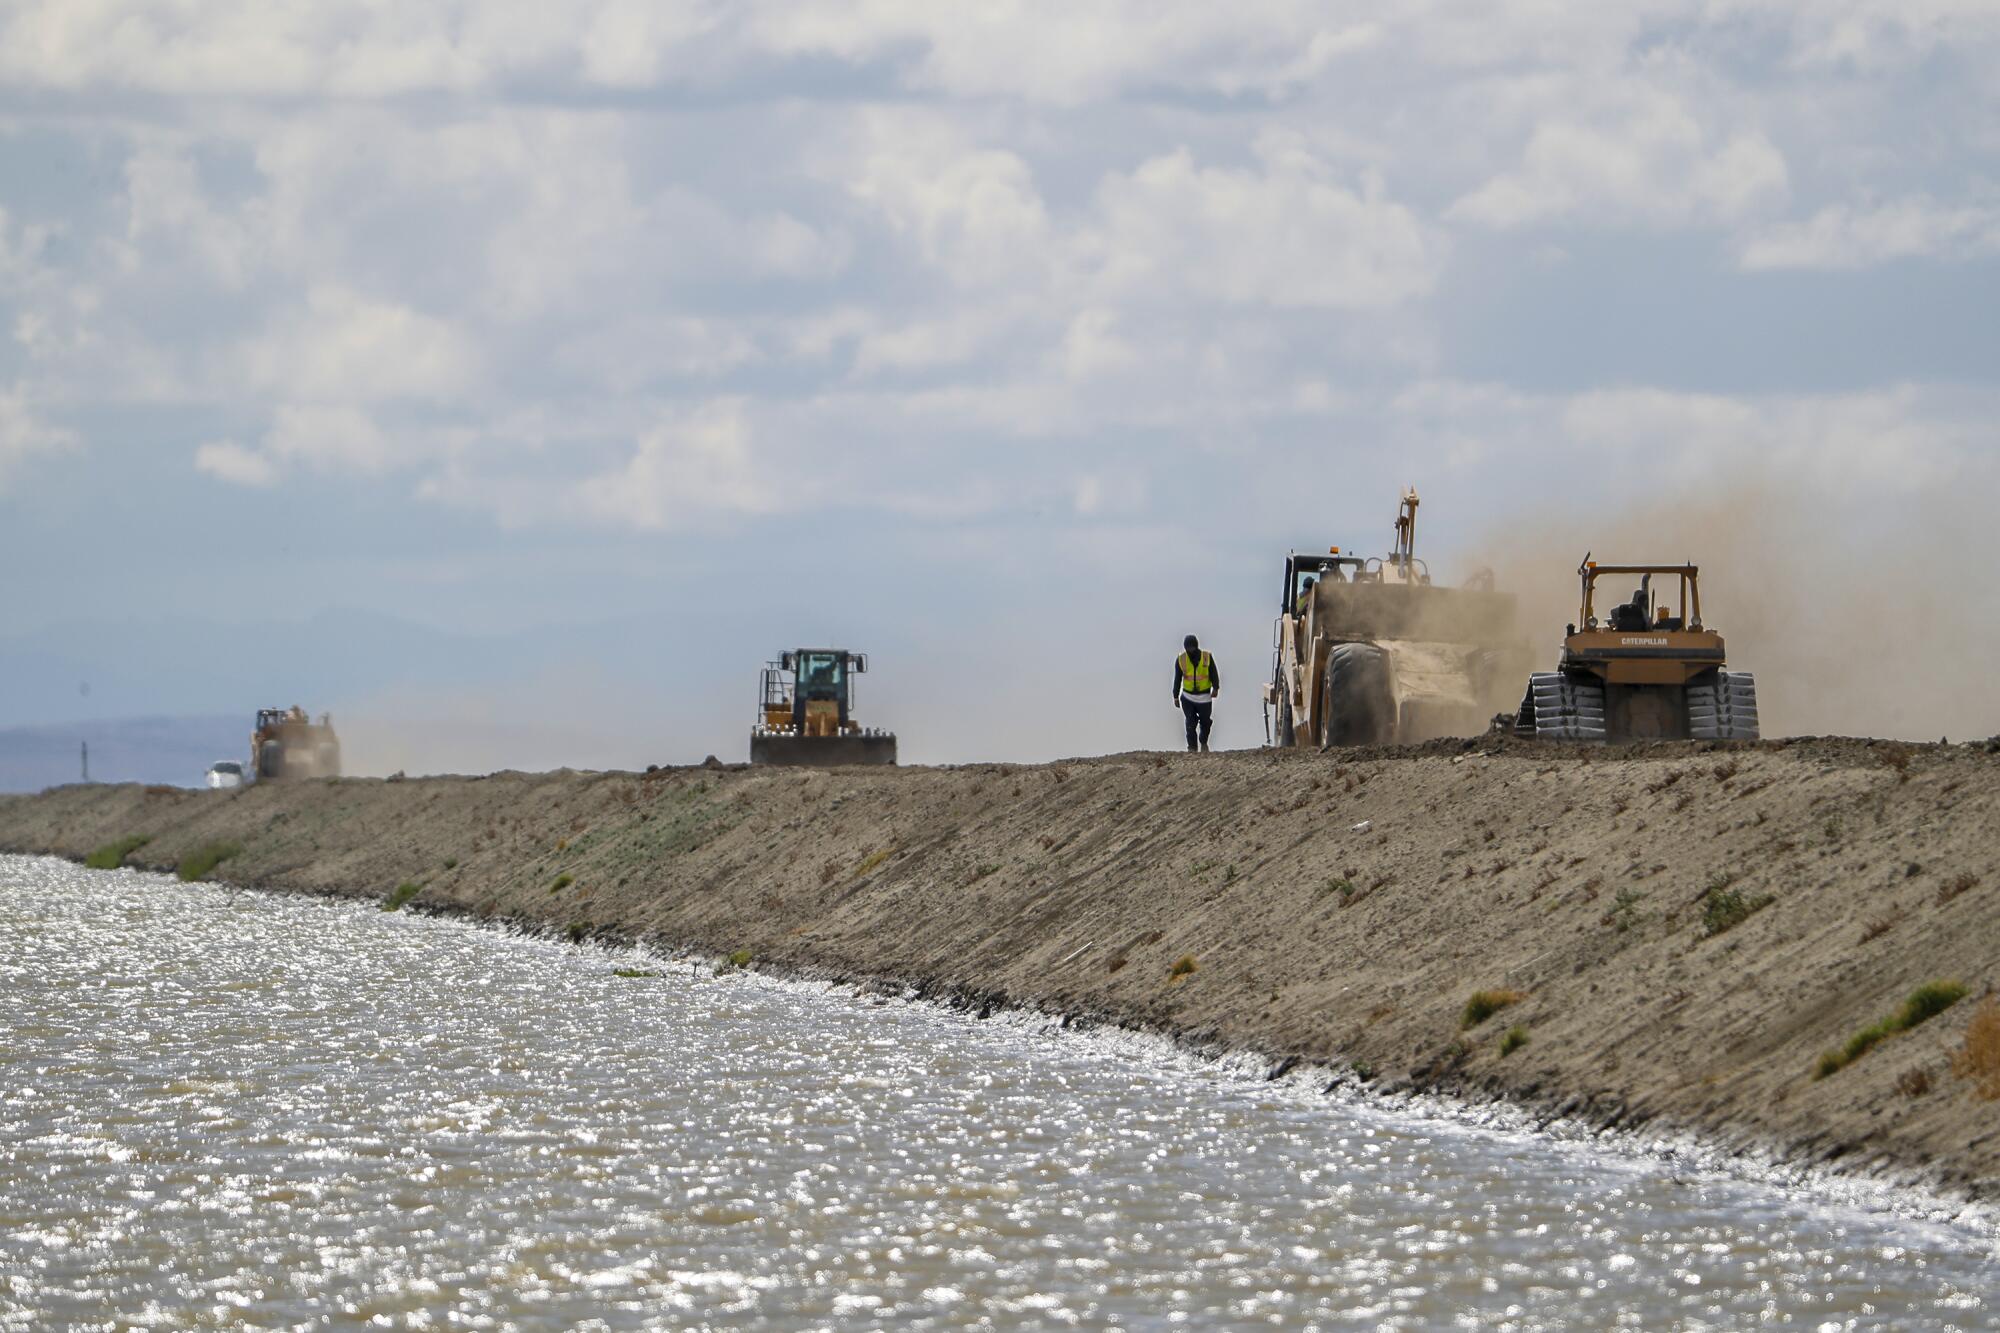 Crews use bulldozers to construct a levee to contain a swelling irrigation ditch.